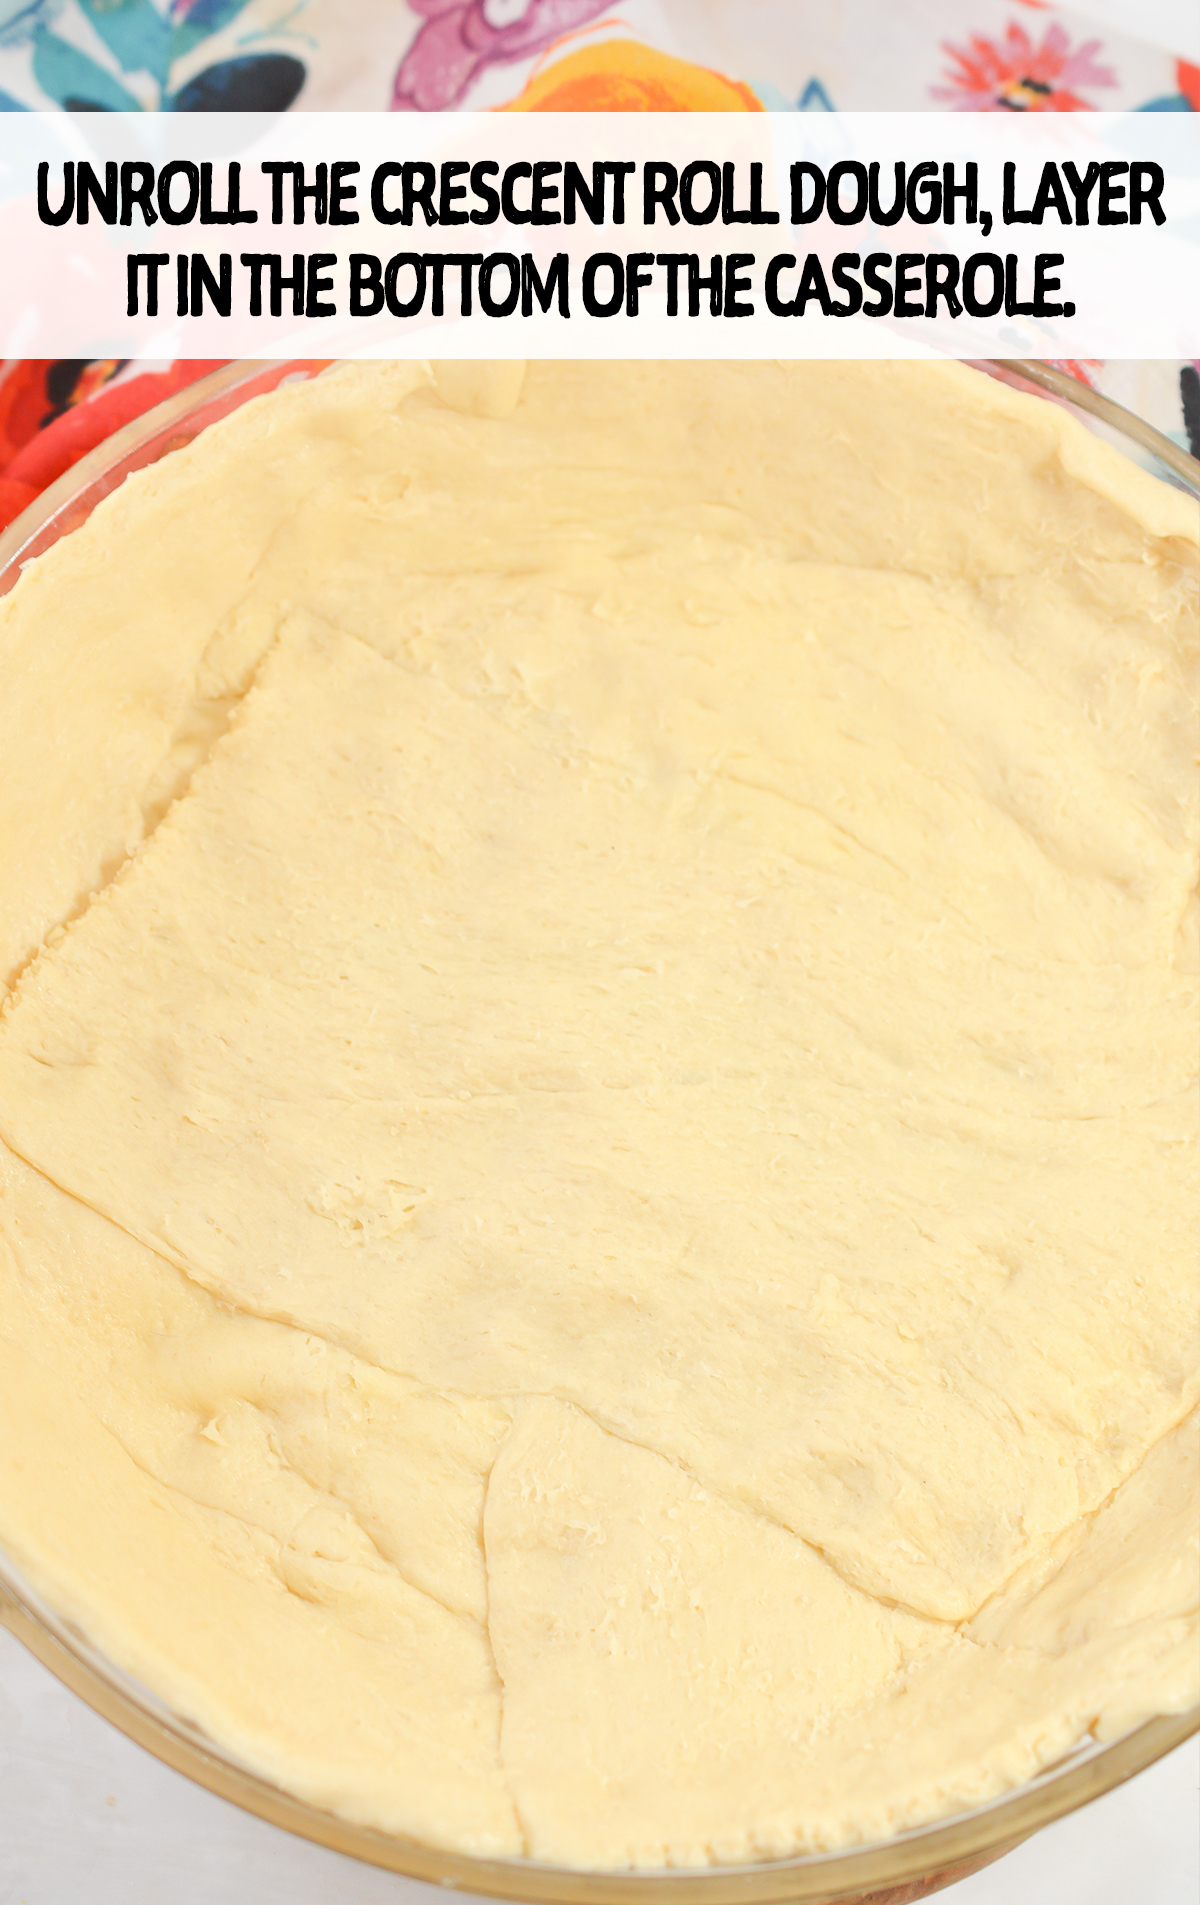 Unroll the crescent roll dough from the tubes, and layer it in the bottom of a 9” pie pan or casserole dish